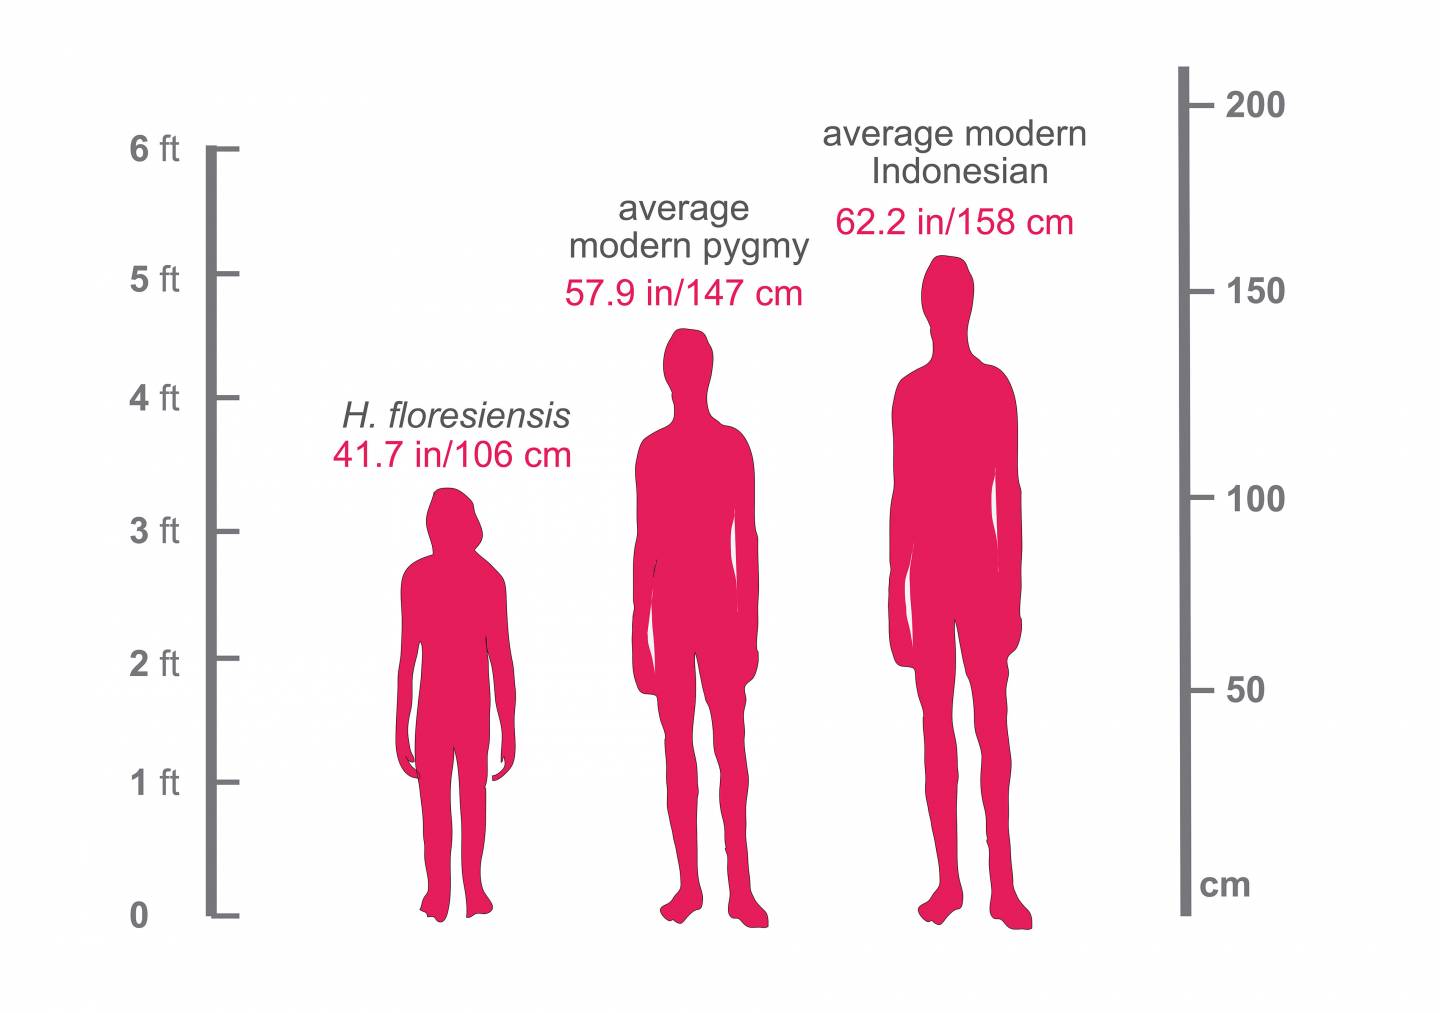 Height comparison between Homo florensiensis, modern pygmy, and average Indonesian